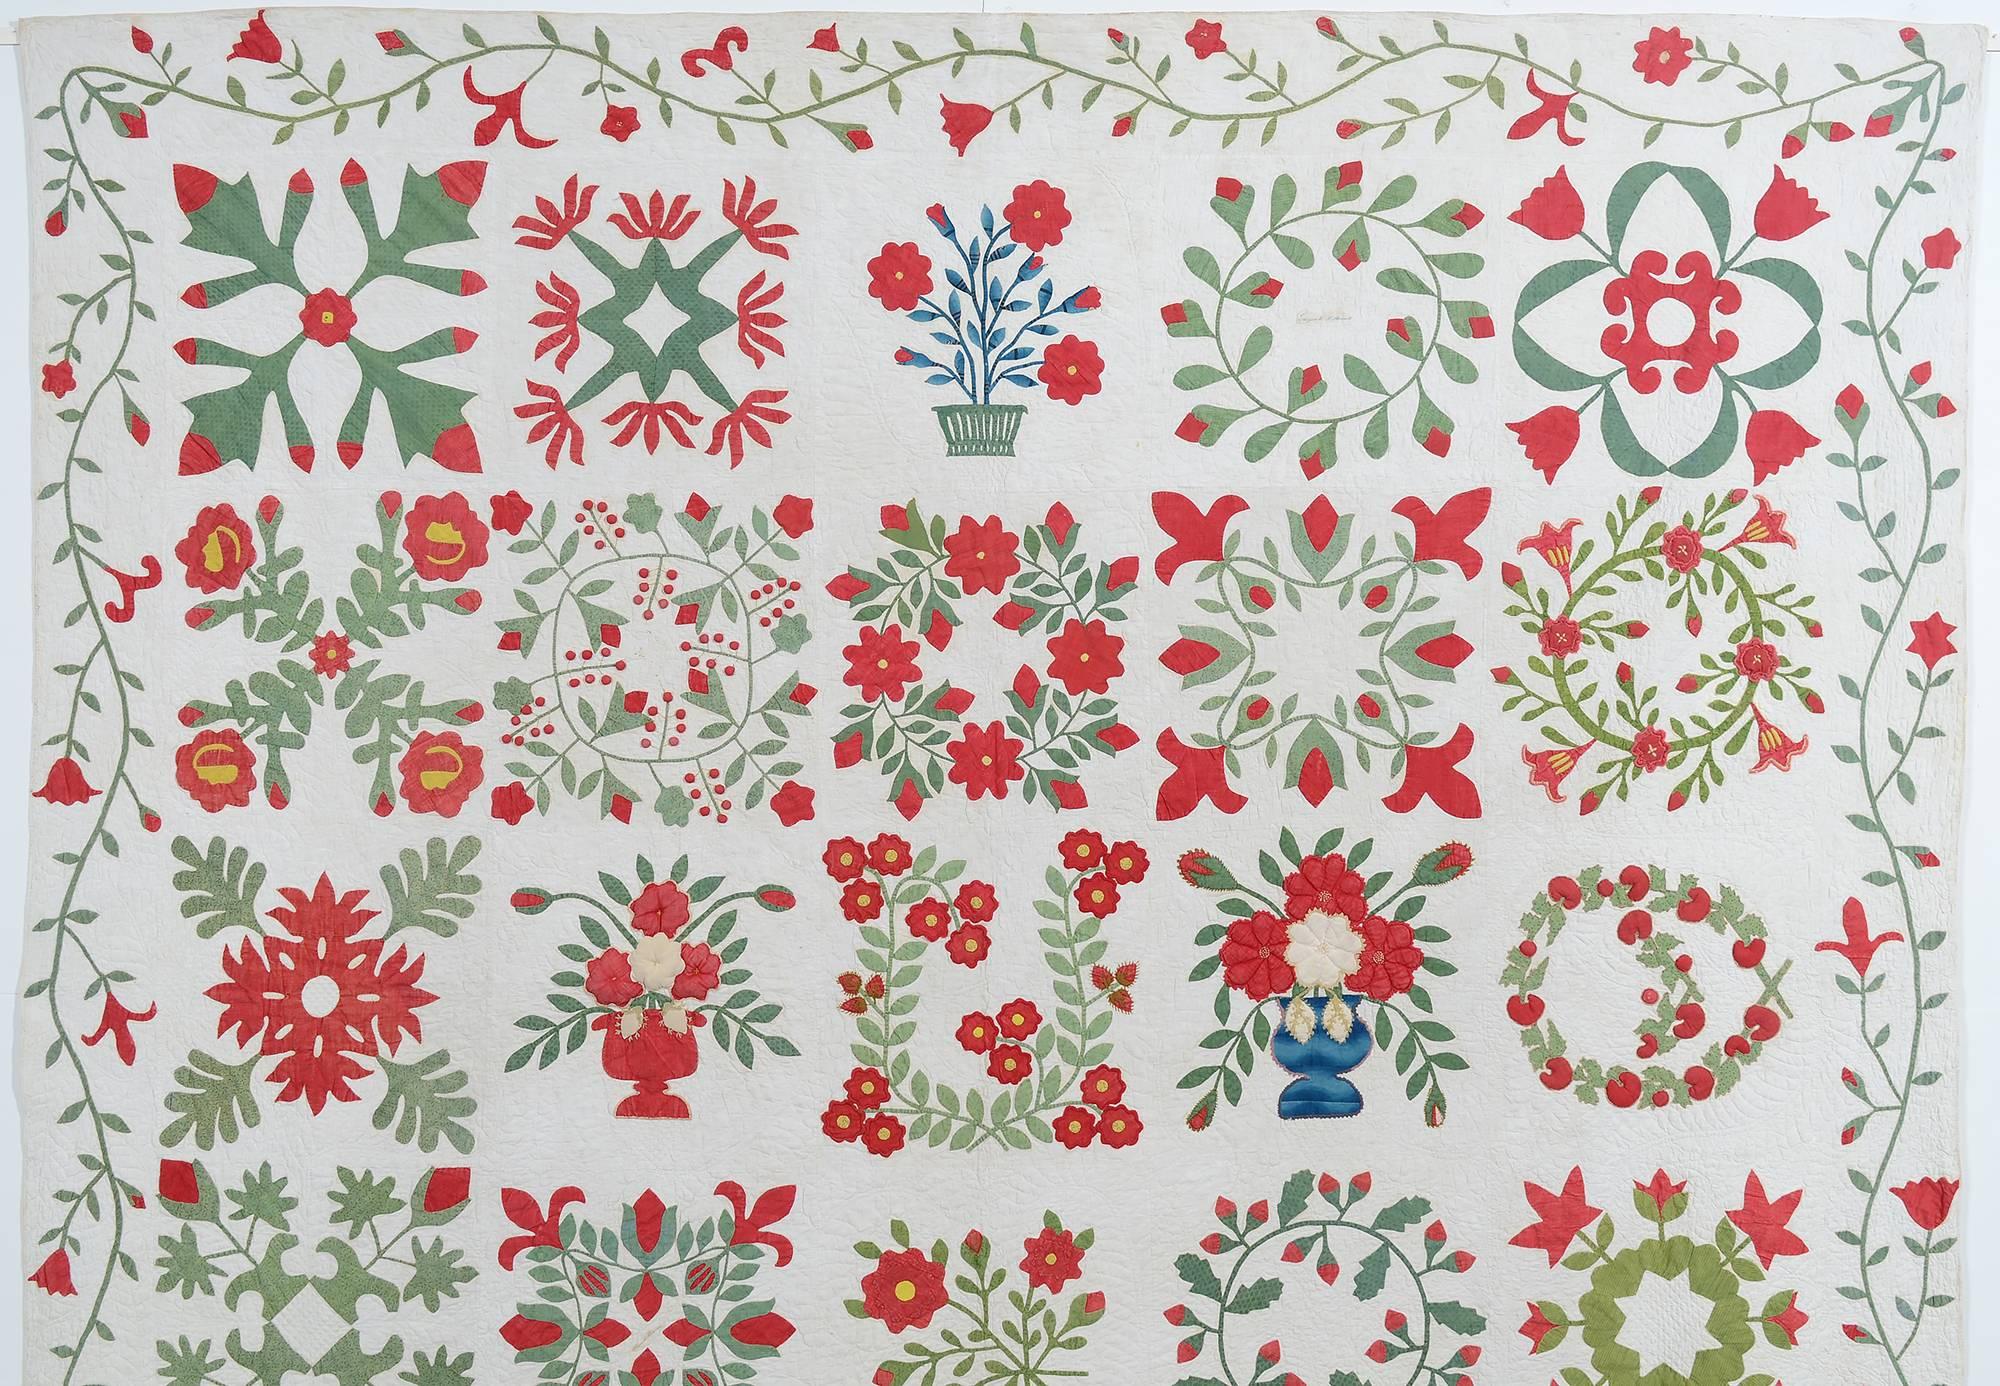 This Classic Baltimore album quilt has all of the fine needlework that one expects to find in this most prized category of 19th century quilts.
It is beautifully quilted with tiny stitches and graceful patterns that wraparound the appliqued blocks.